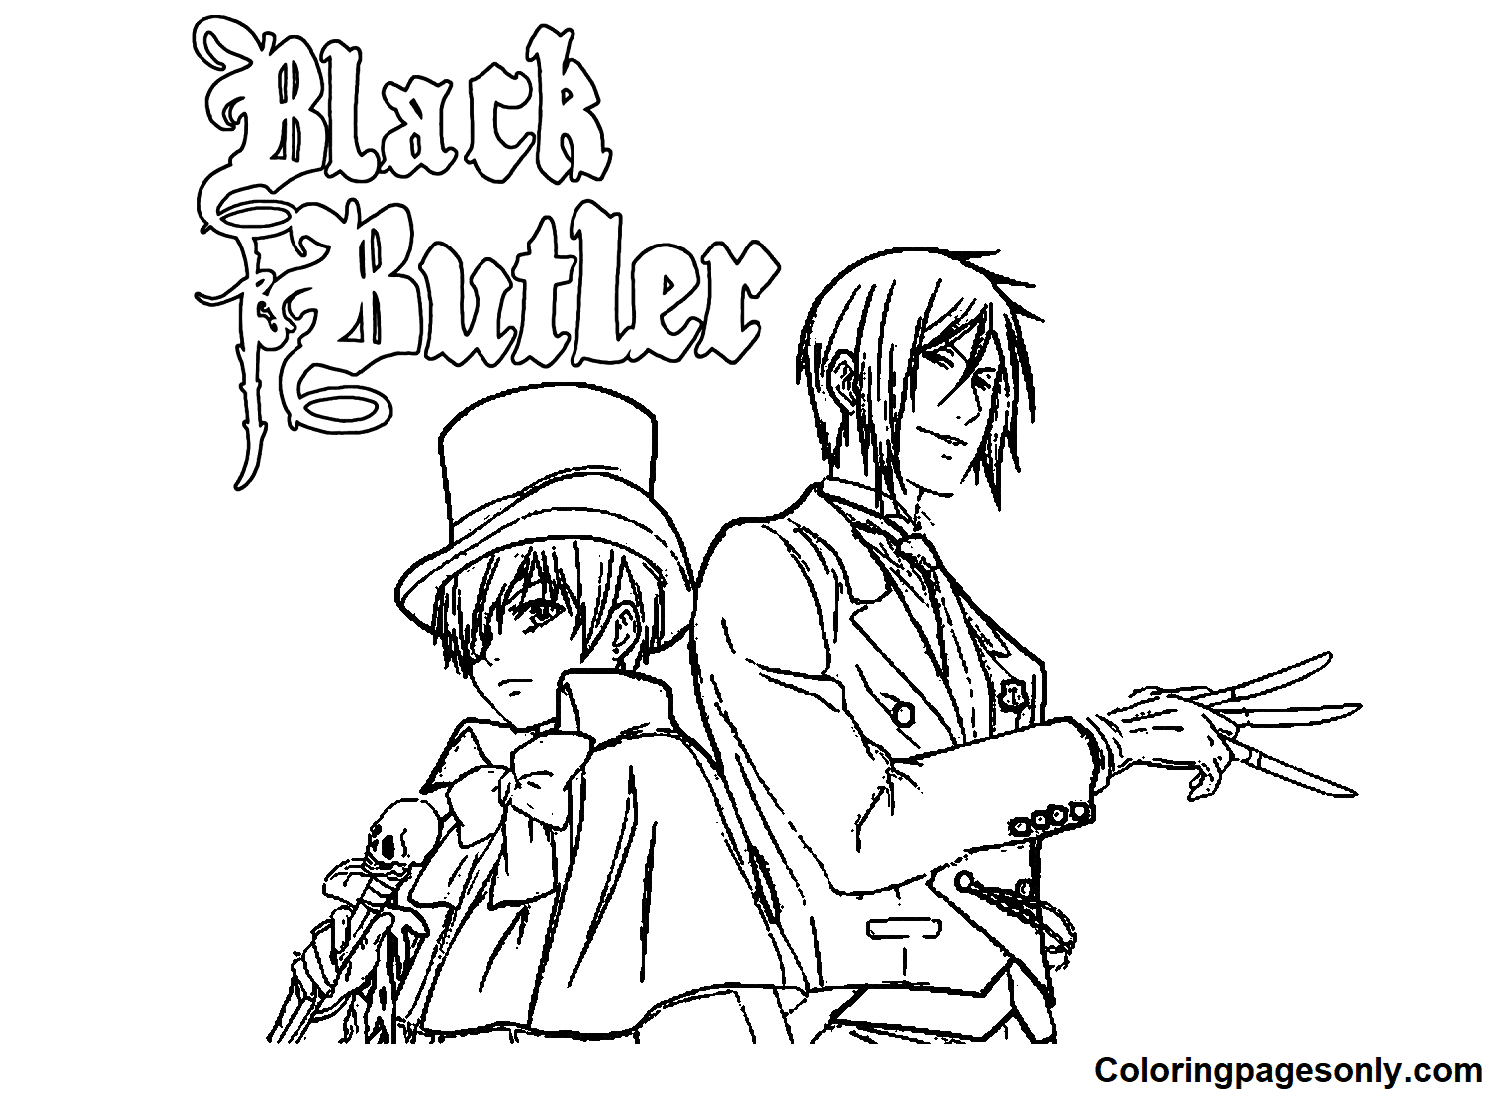 Black Butler Images Coloring Pages